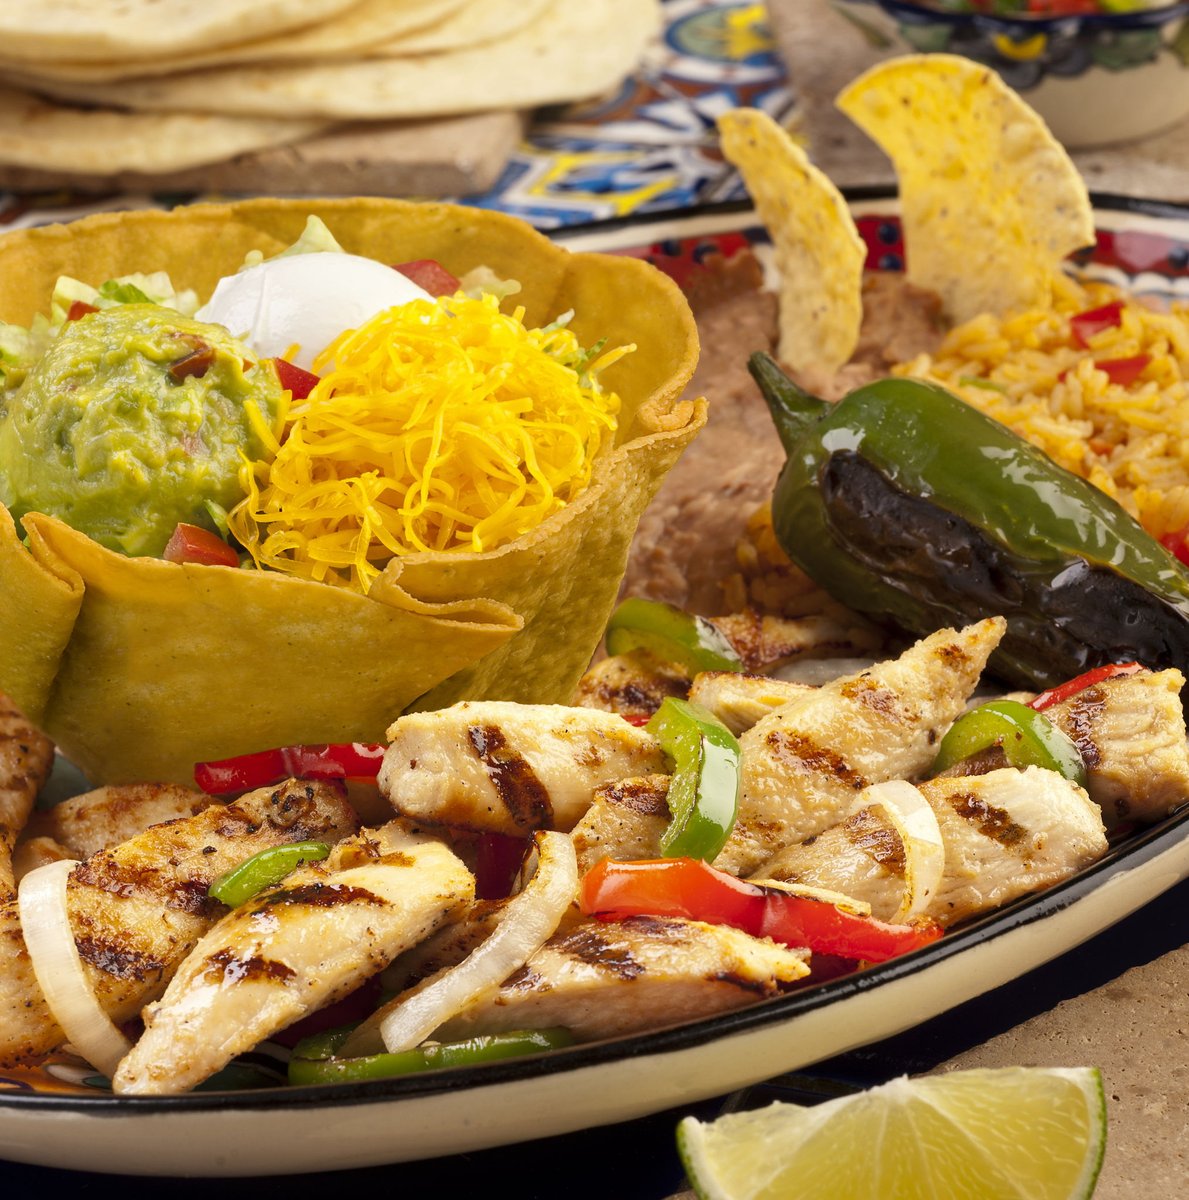 Sizzle, sizzle🔥 What are your lunch plans? Come enjoy Rosa’s famous mesquite-flavored grilled chicken fajitas! 

#rosascafeandtortillafactory #madefromscratch #restaurant #vip #authentic #tacos #mexicanfood #rosas #queso #greattaste #homeade #lifeisbetter #vipclub